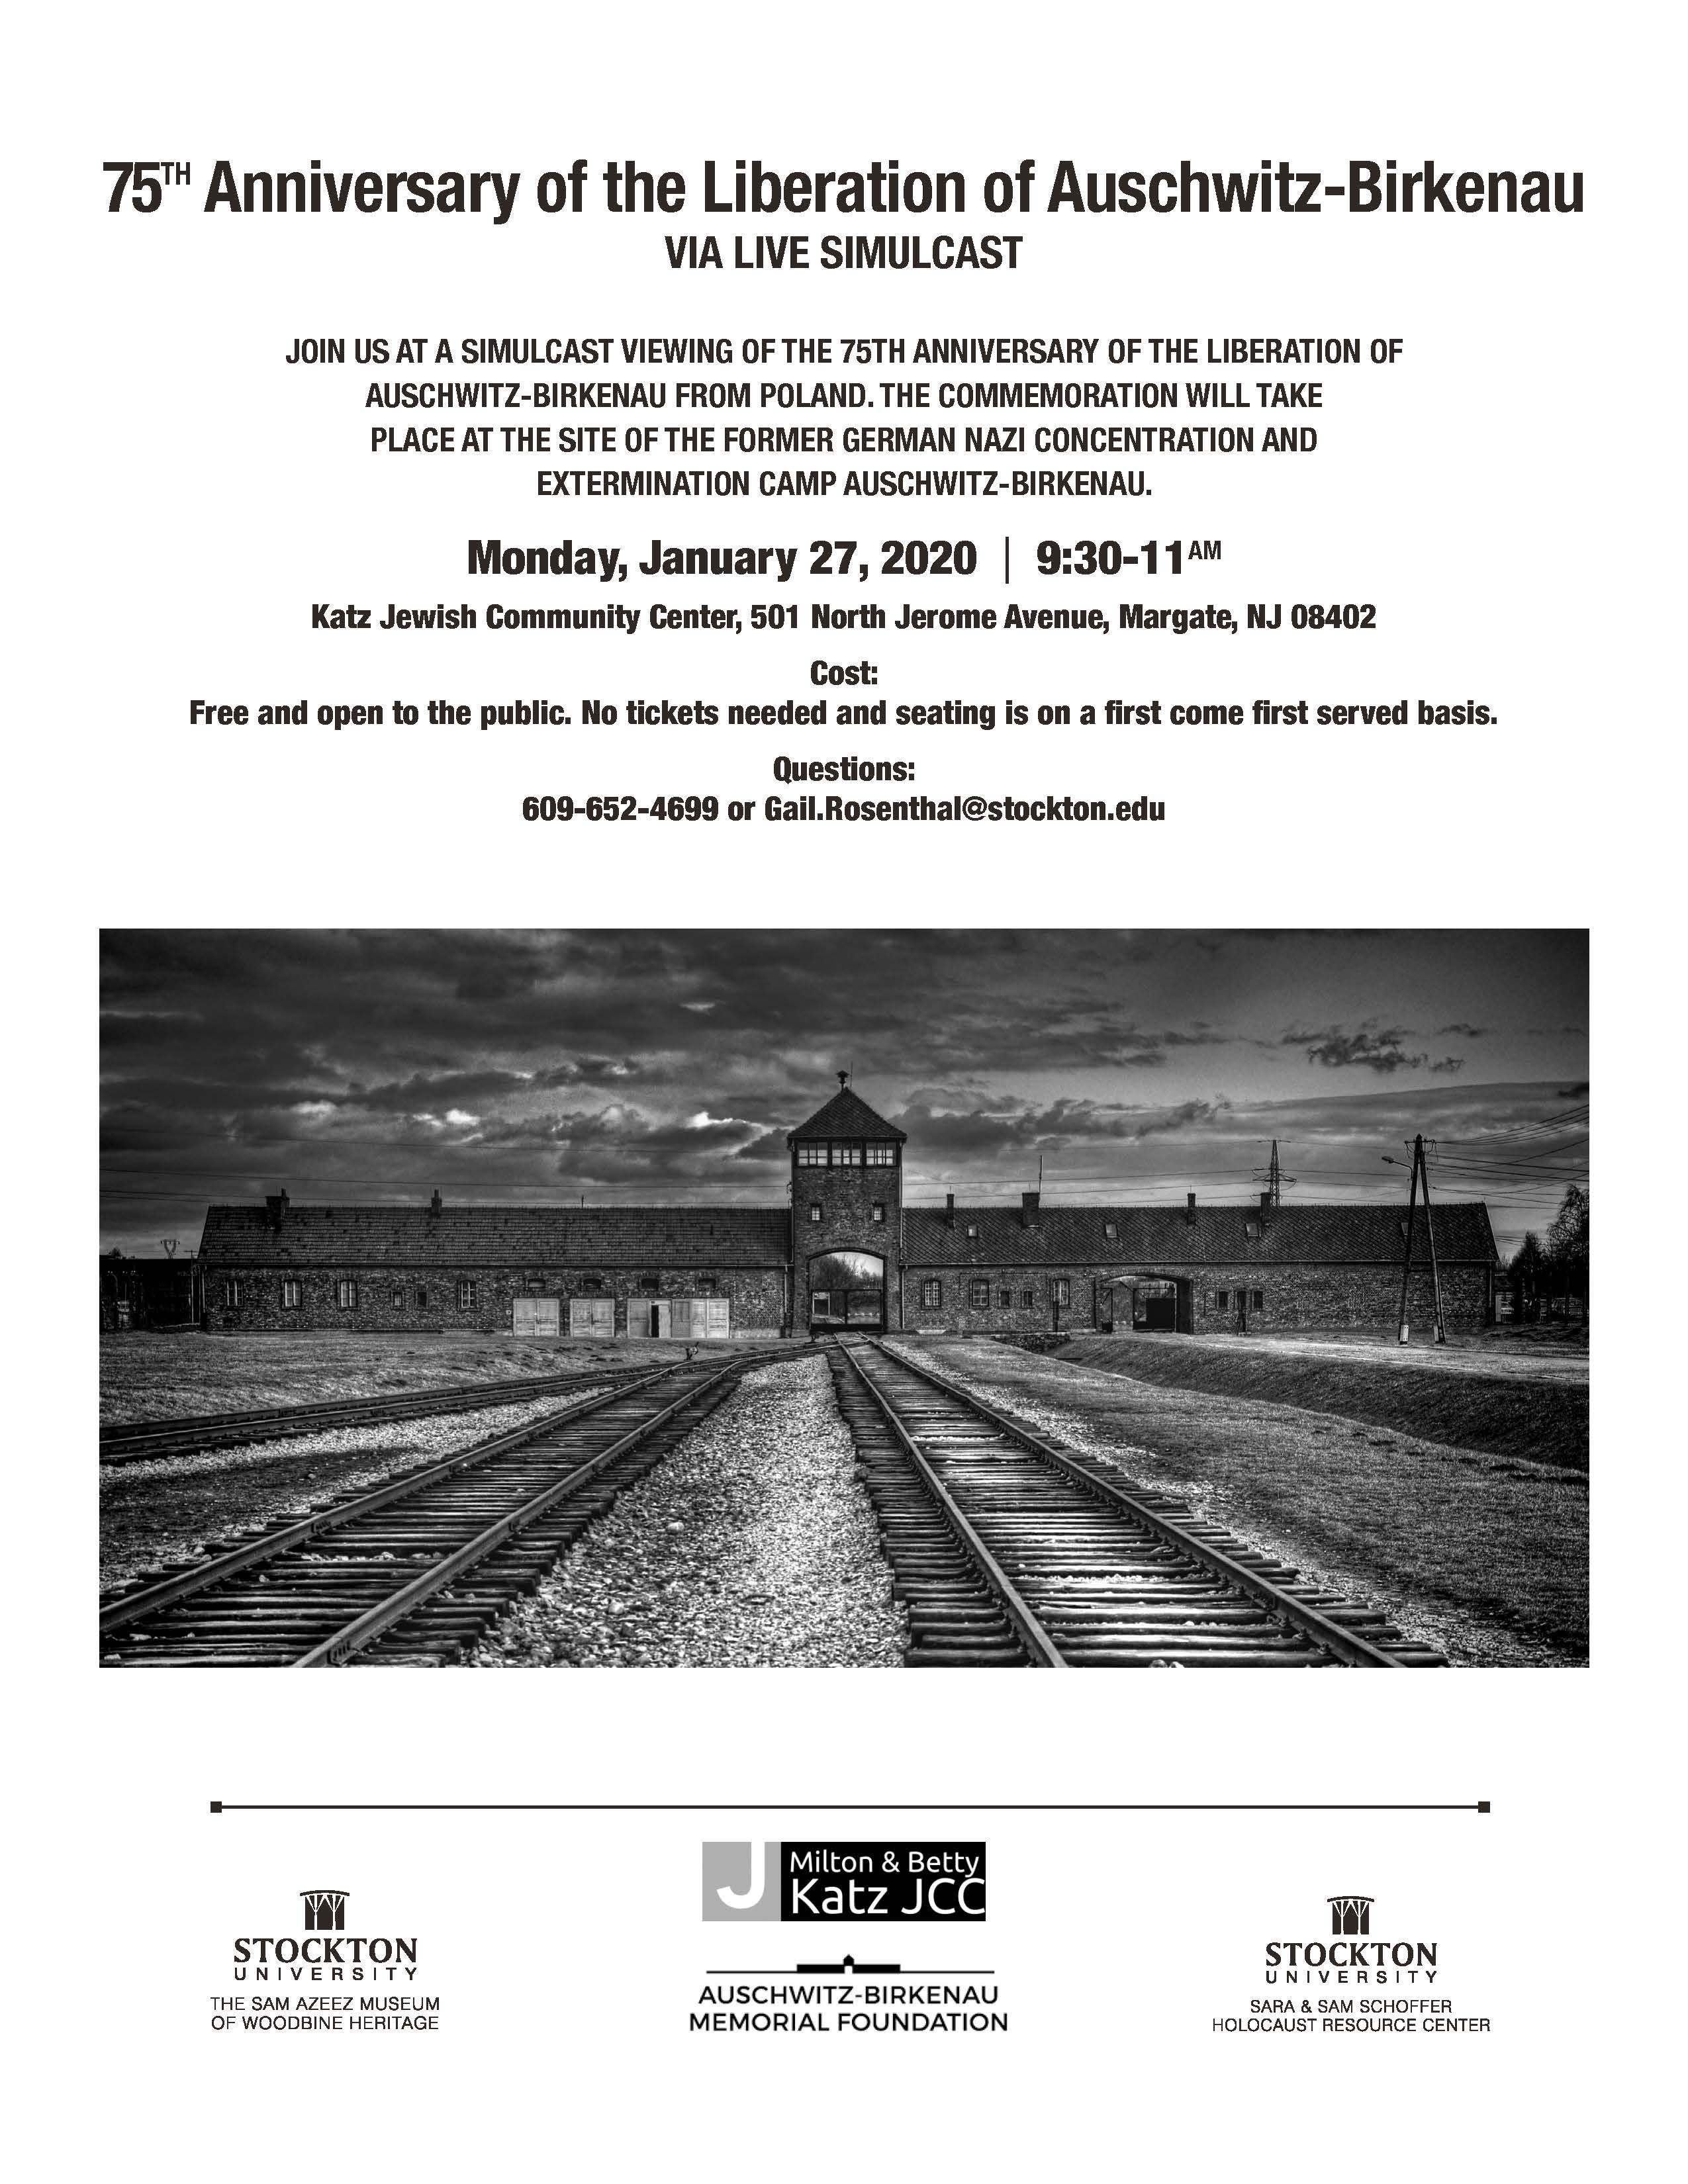 75th Anniversary of the Liberation of Auschwitz flyer 